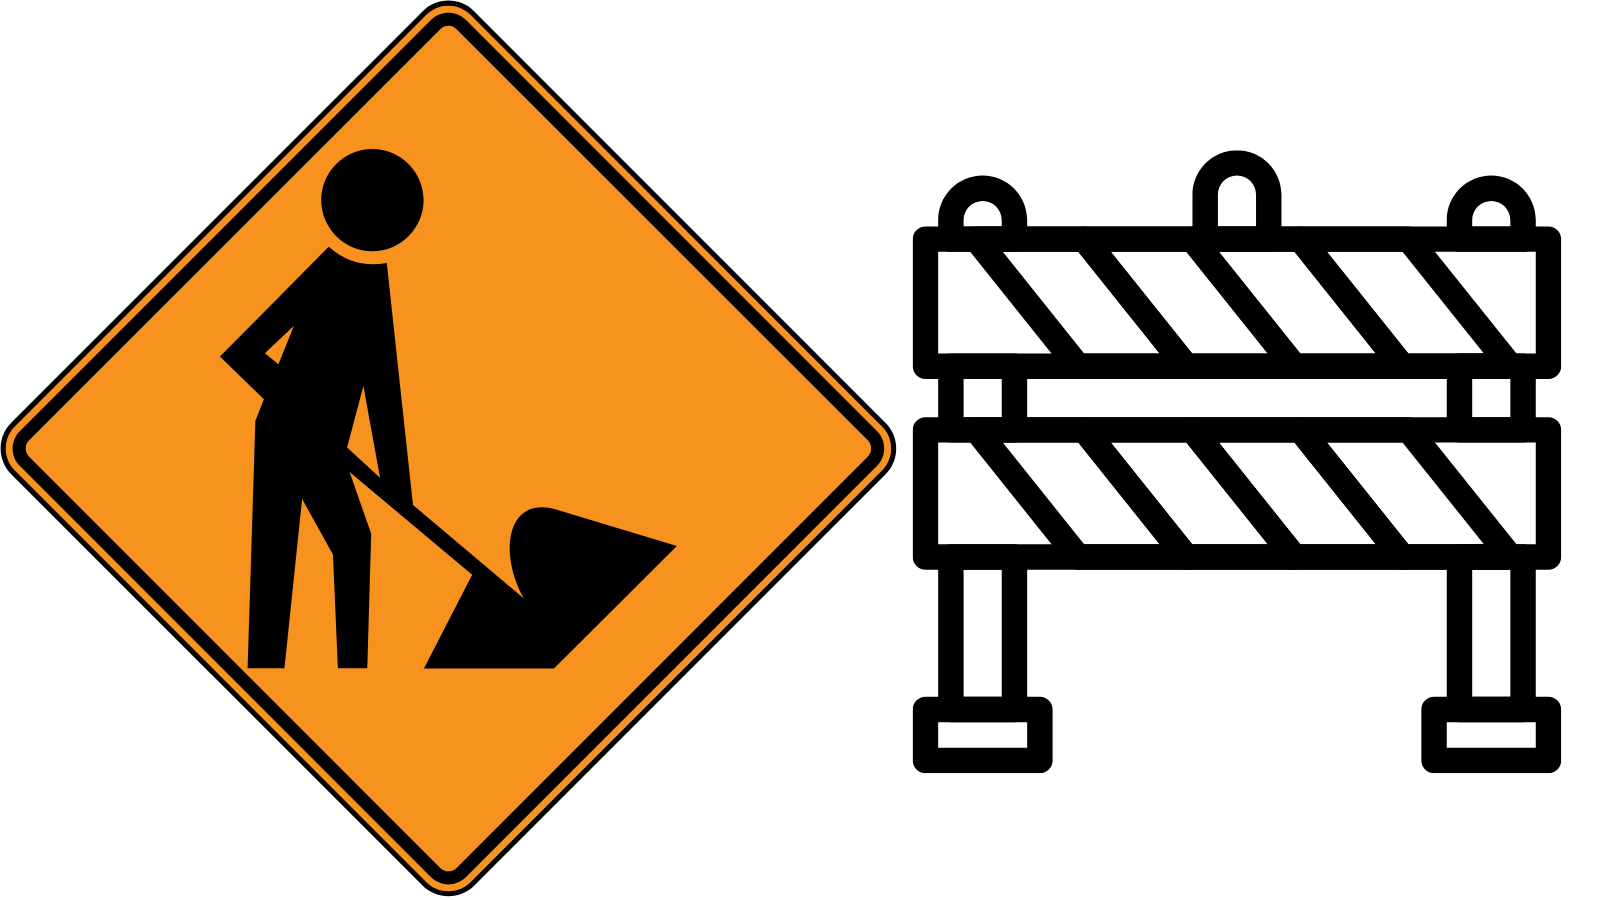 July 4th travelers and road construction